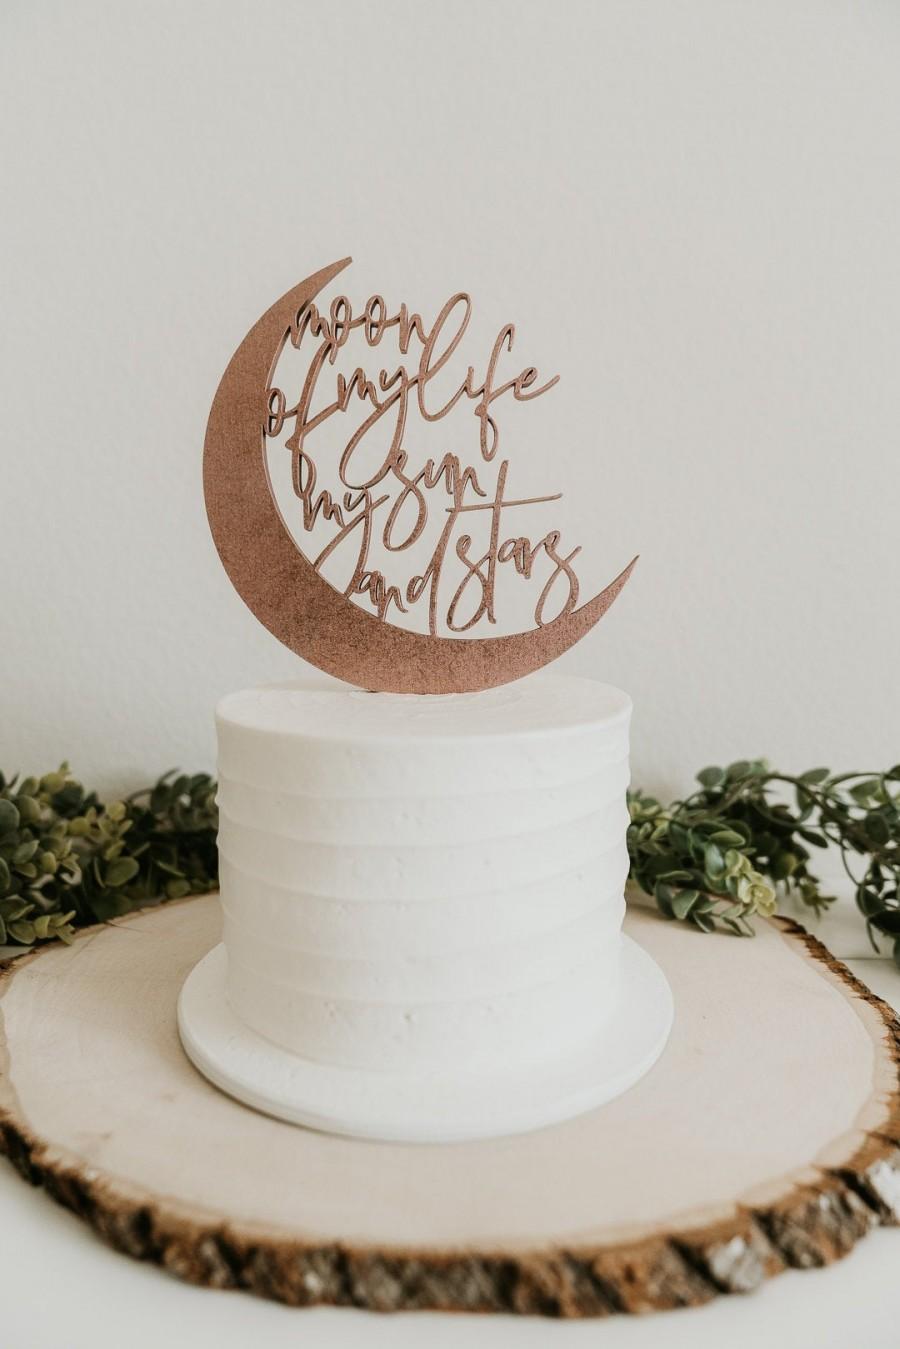 Hochzeit - moon of my life my sun and stars cake topper, wedding cake topper, baby shower cake topper, moon cake topper, moon party decor